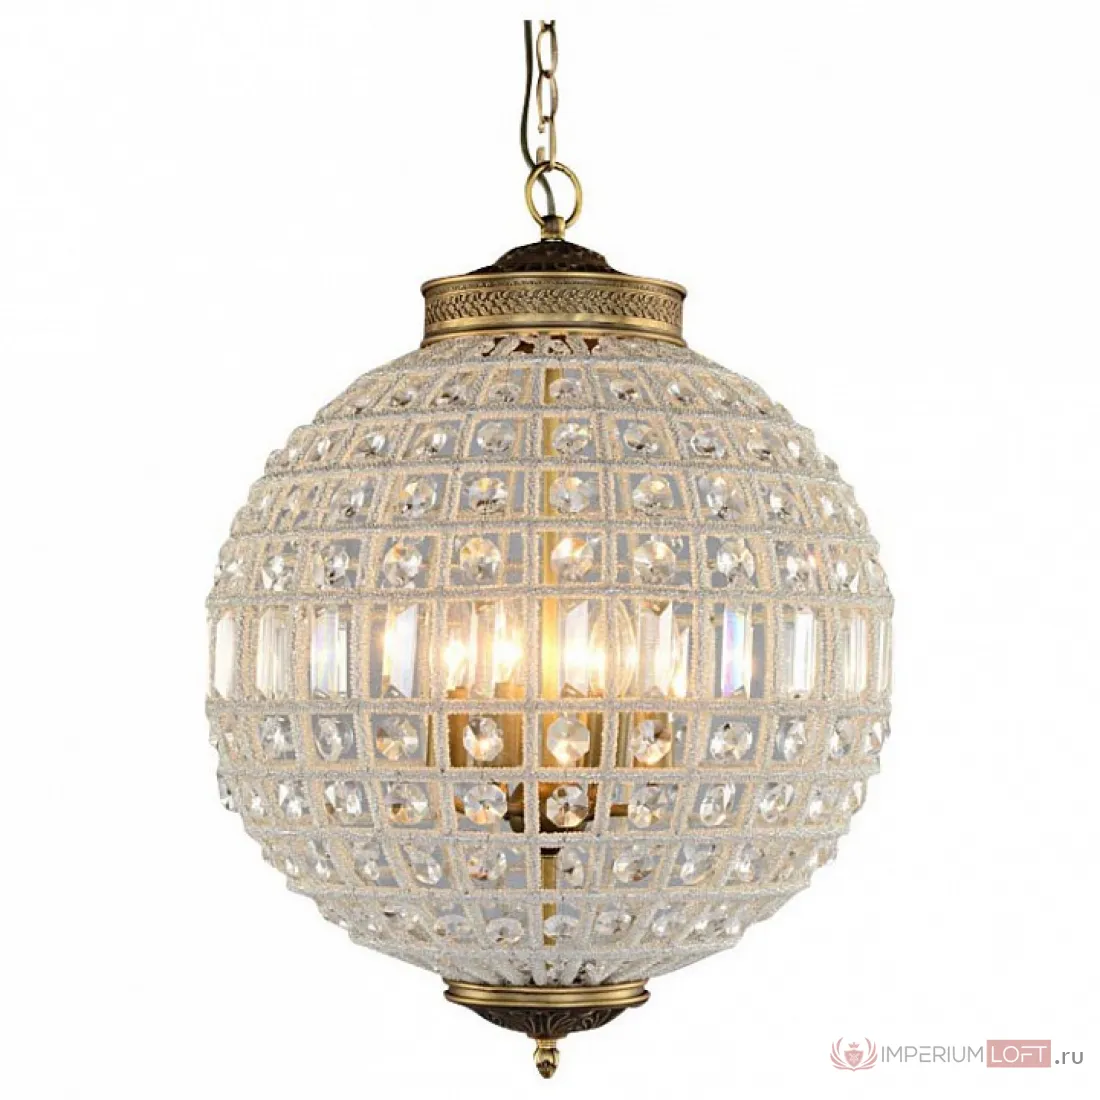 Светильники delight collection. Люстра Casbah Crystal Chandelier. Подвесной светильник Delight collection. Люстра rh 19th c. Casbah Crystal Brass. Подвесной светильник Delight collection Murano Glass.